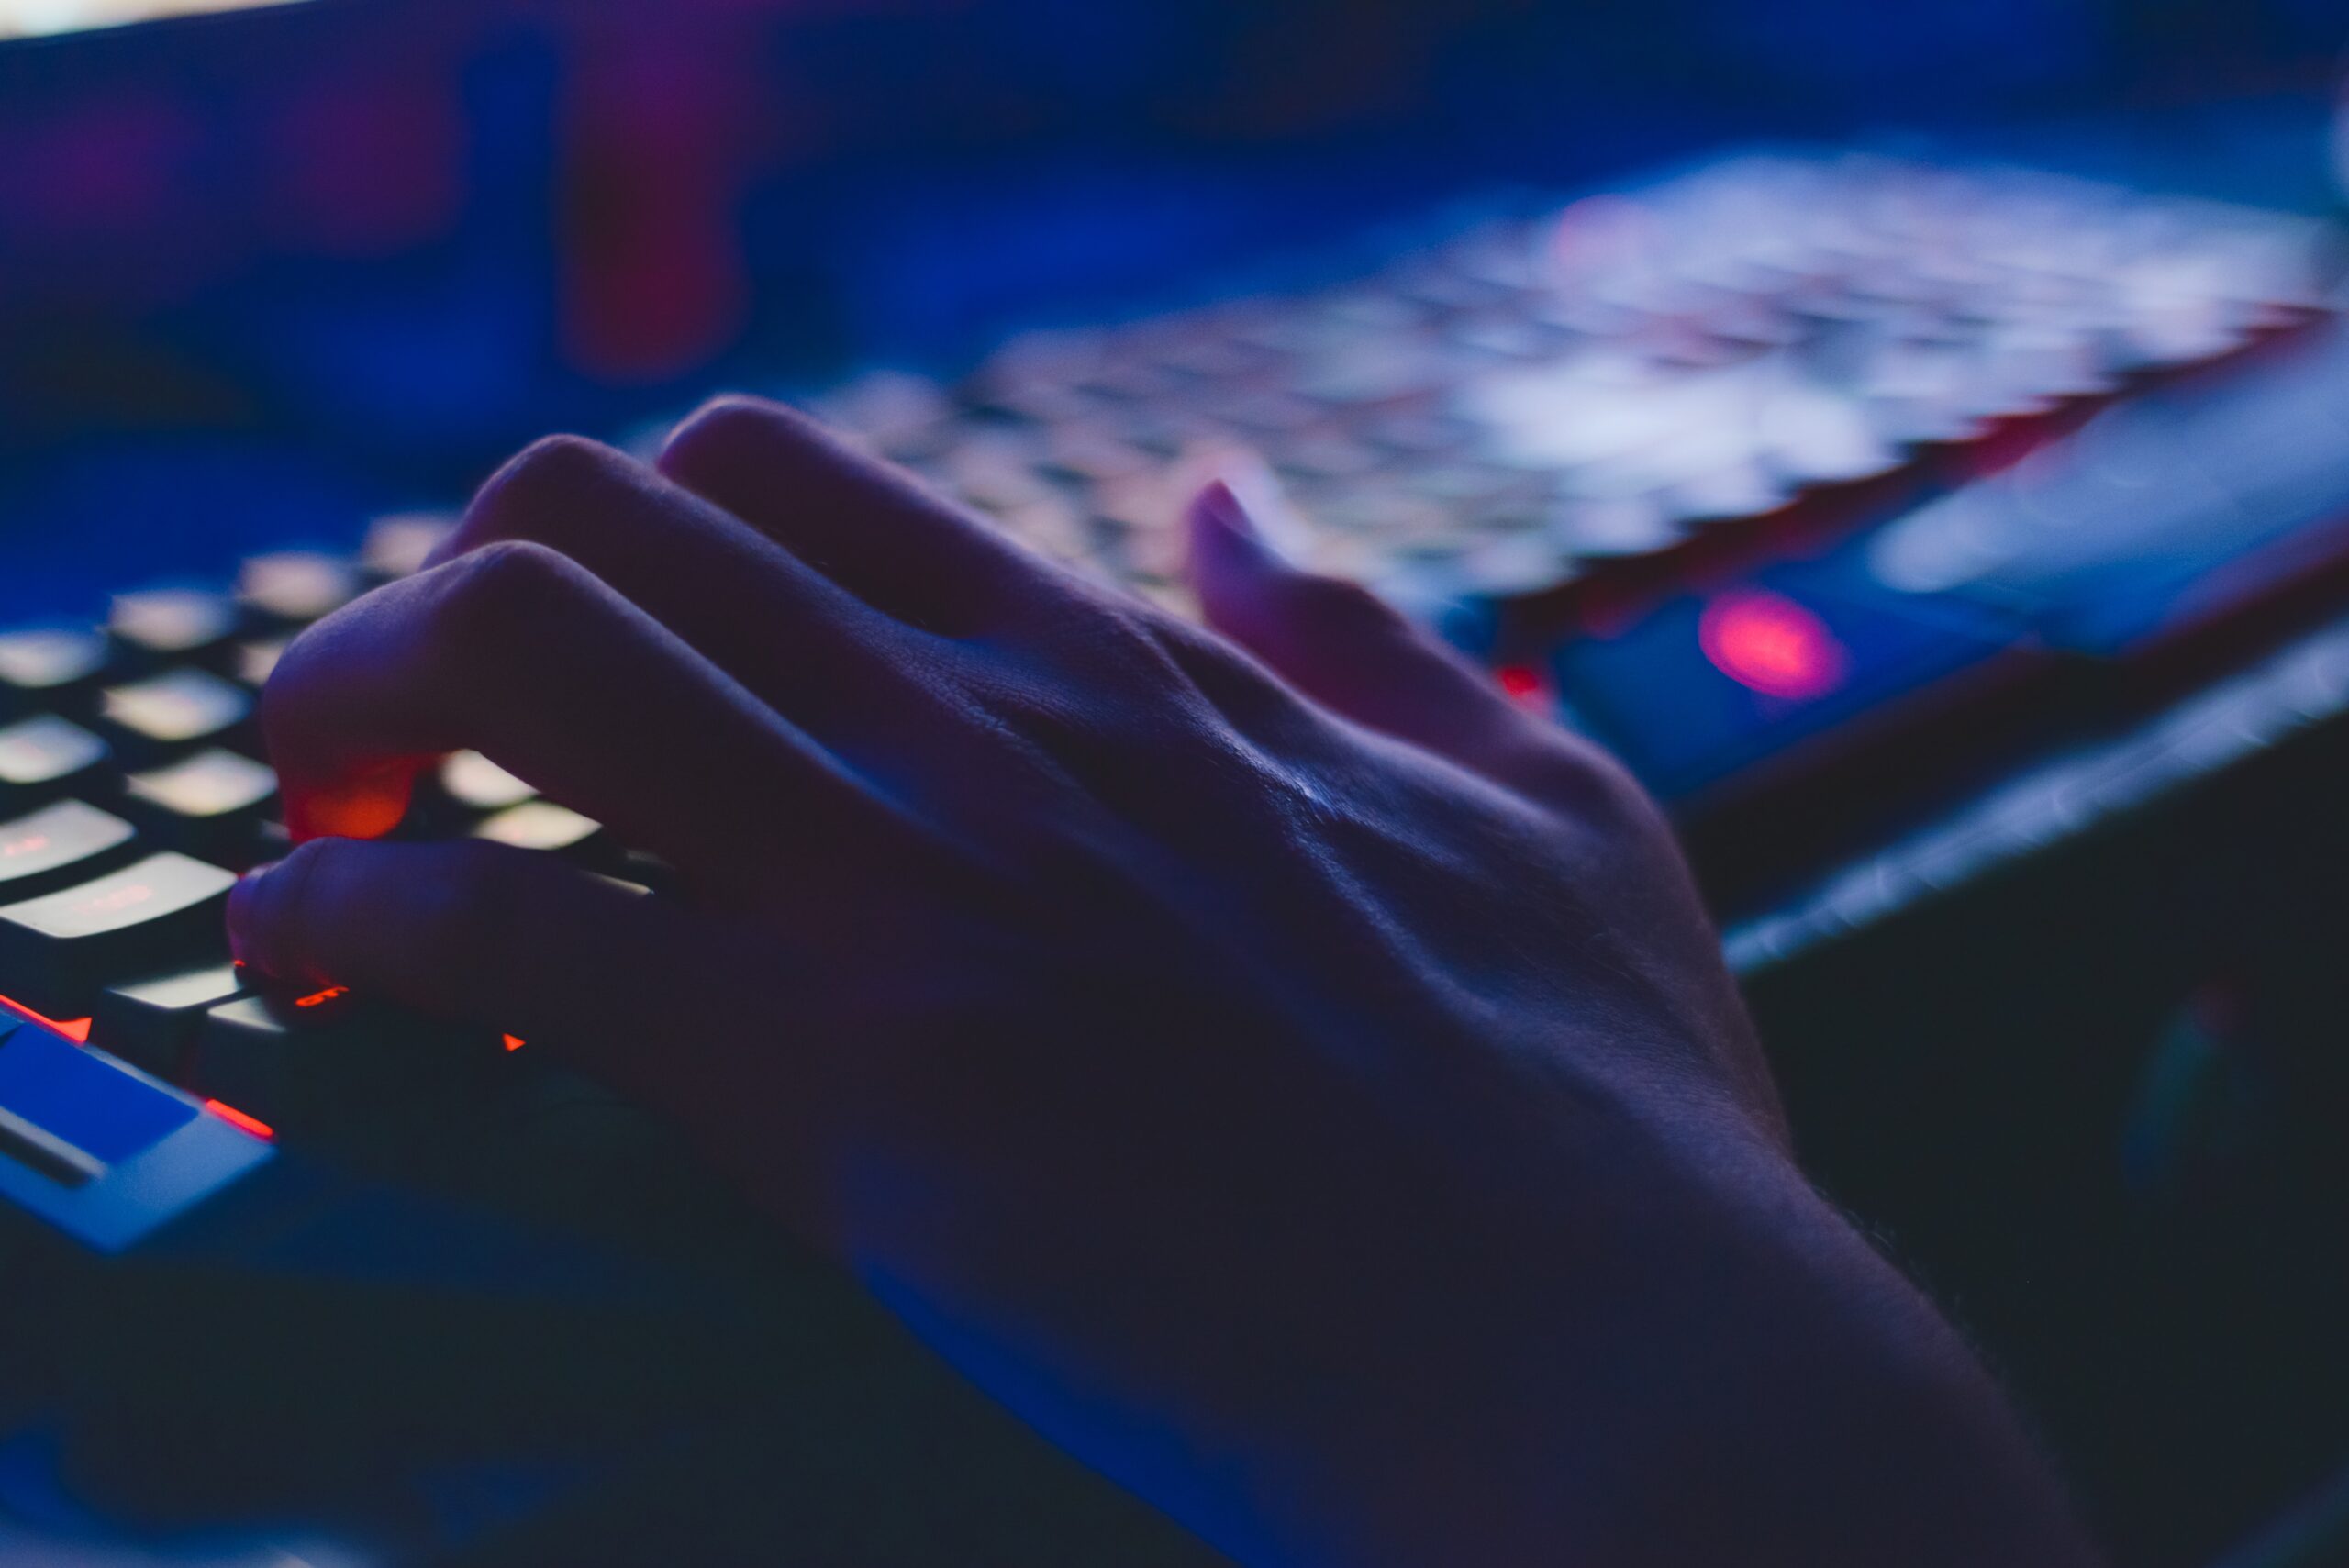 A close-up of a person's hands typing on a backlit gaming keyboard in a dimly lit room, emphasizing the vivid colors on the keys.